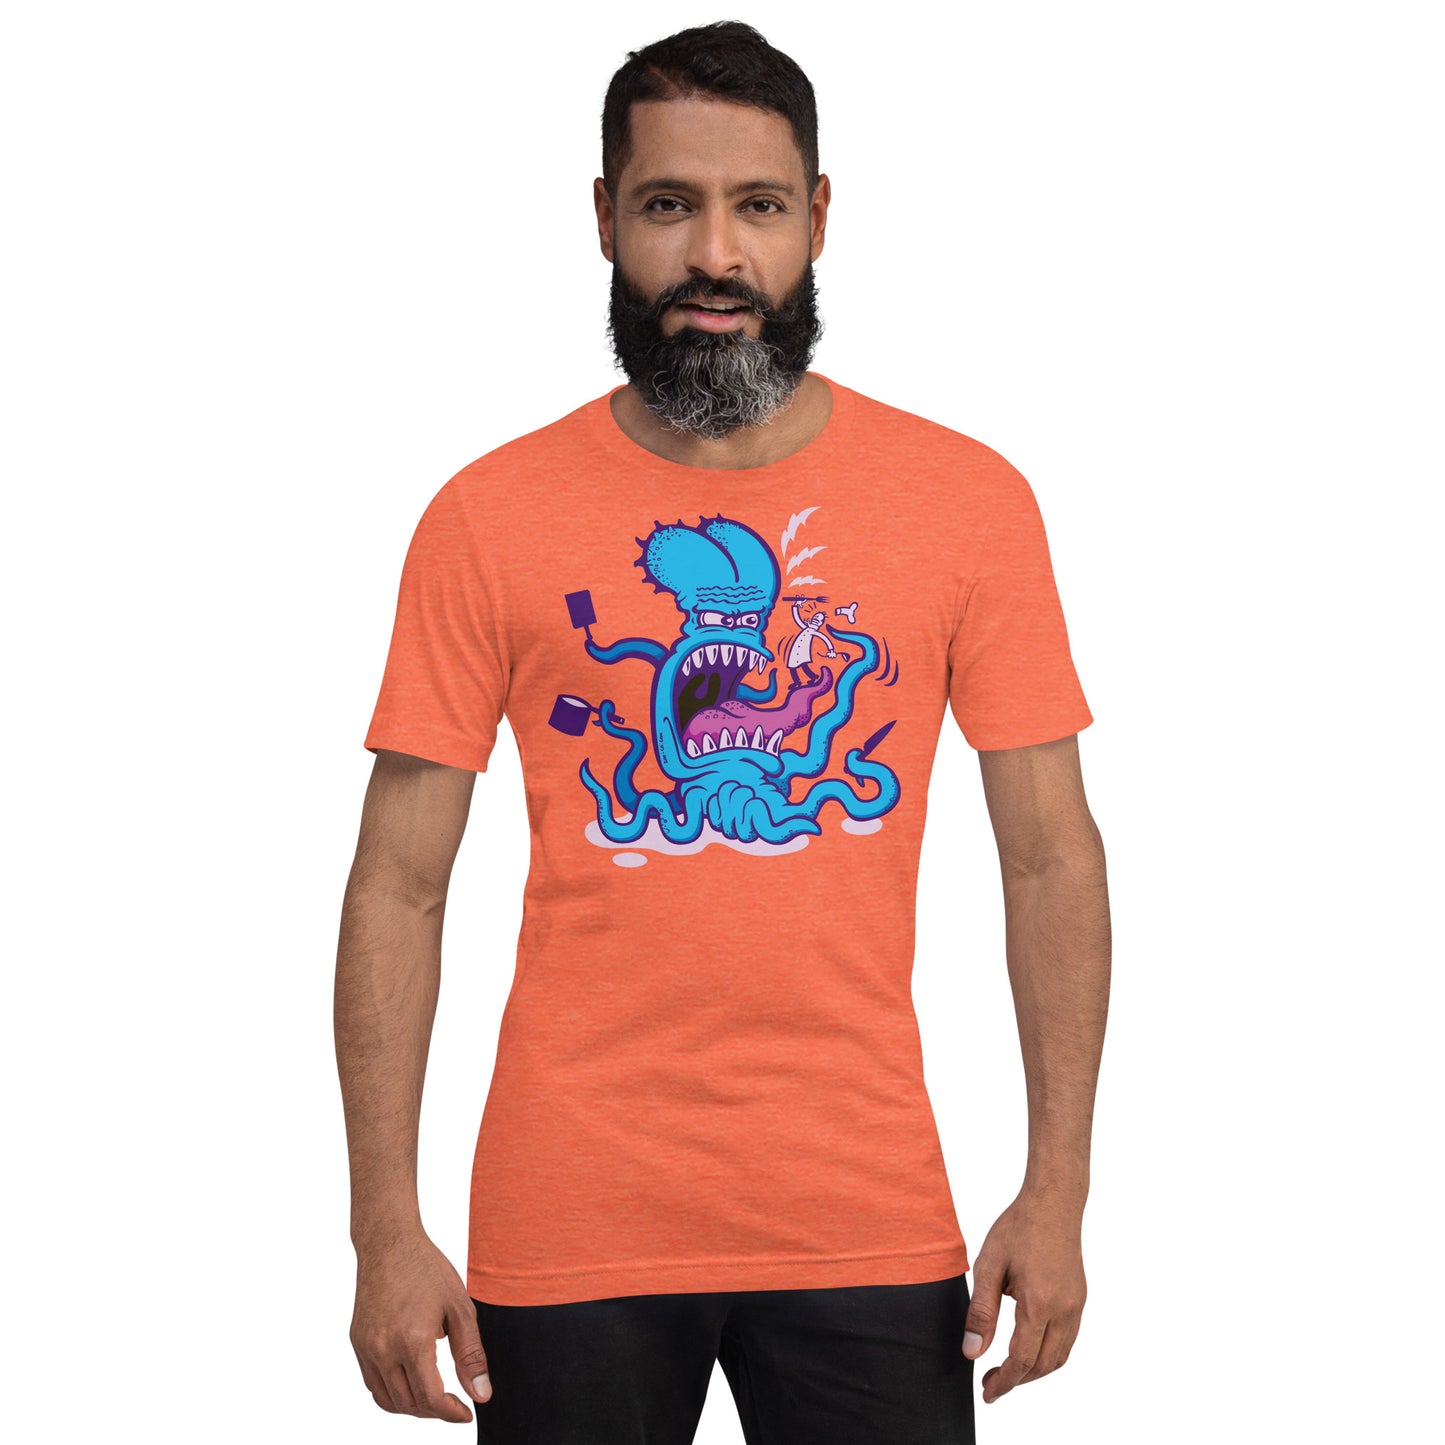 When cooking the perfect octopus recipe becomes extremely dangerous Unisex t-shirt. Man wearing heather orange model